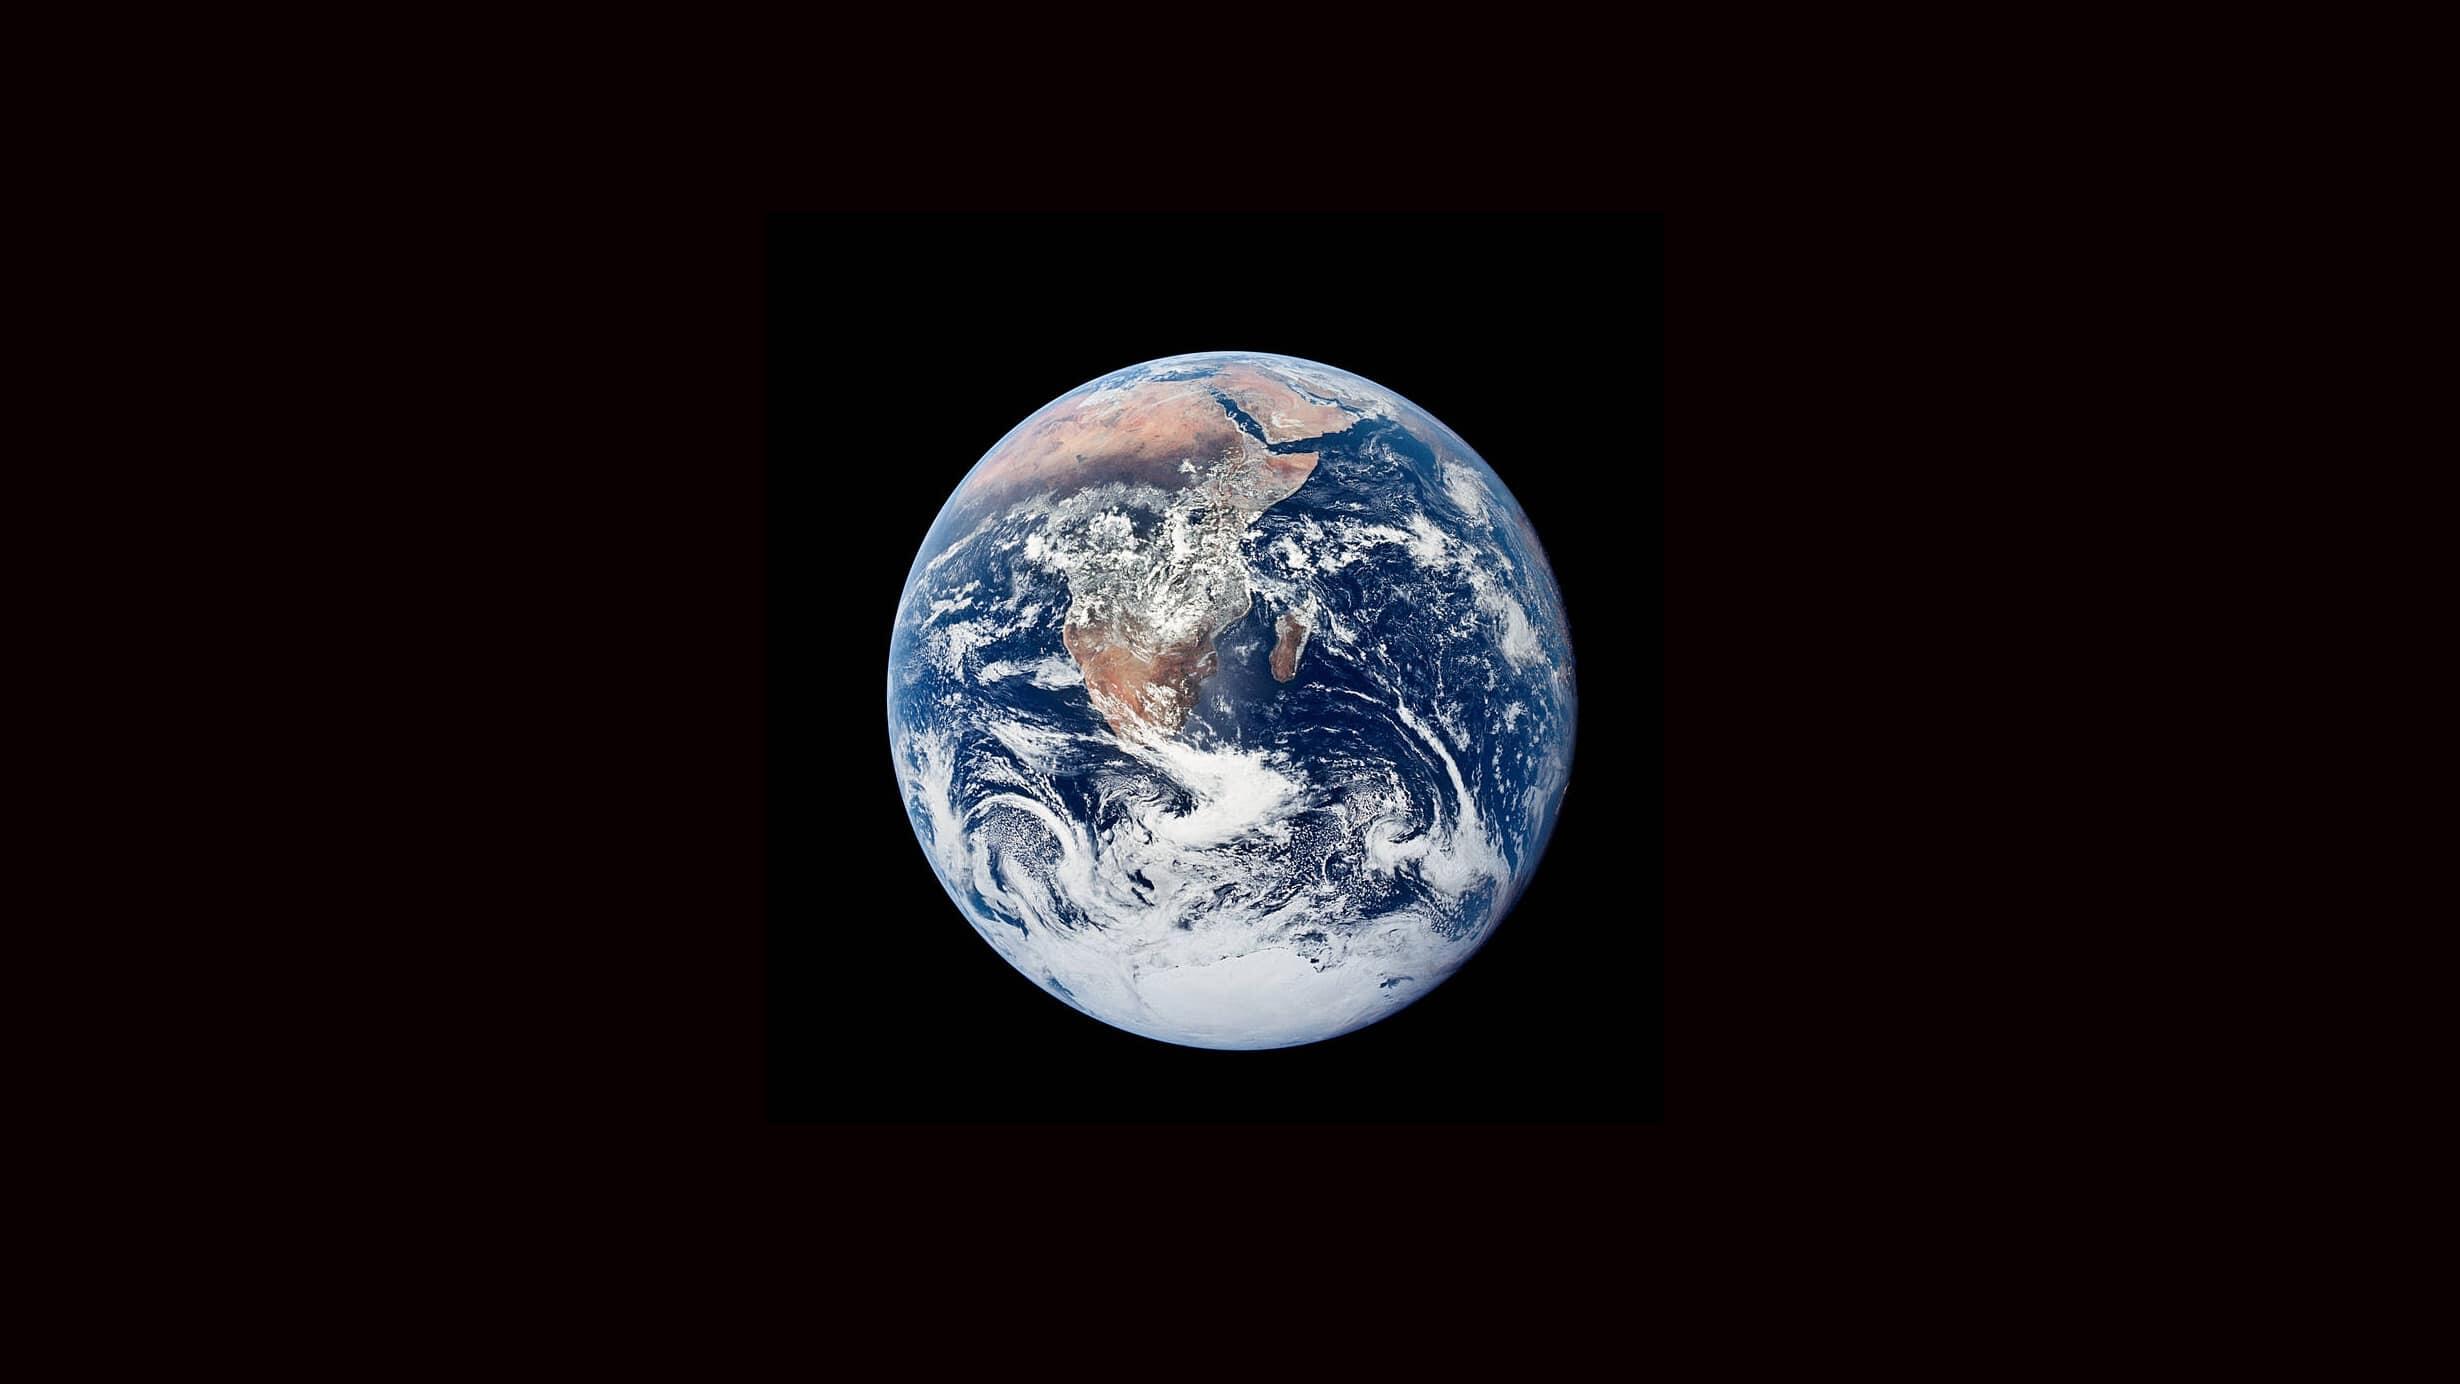 An iconic image of the Earth, taken by astronauts on the final Apollo mission in 1972 - the first to fully capture the south polar ice cap.